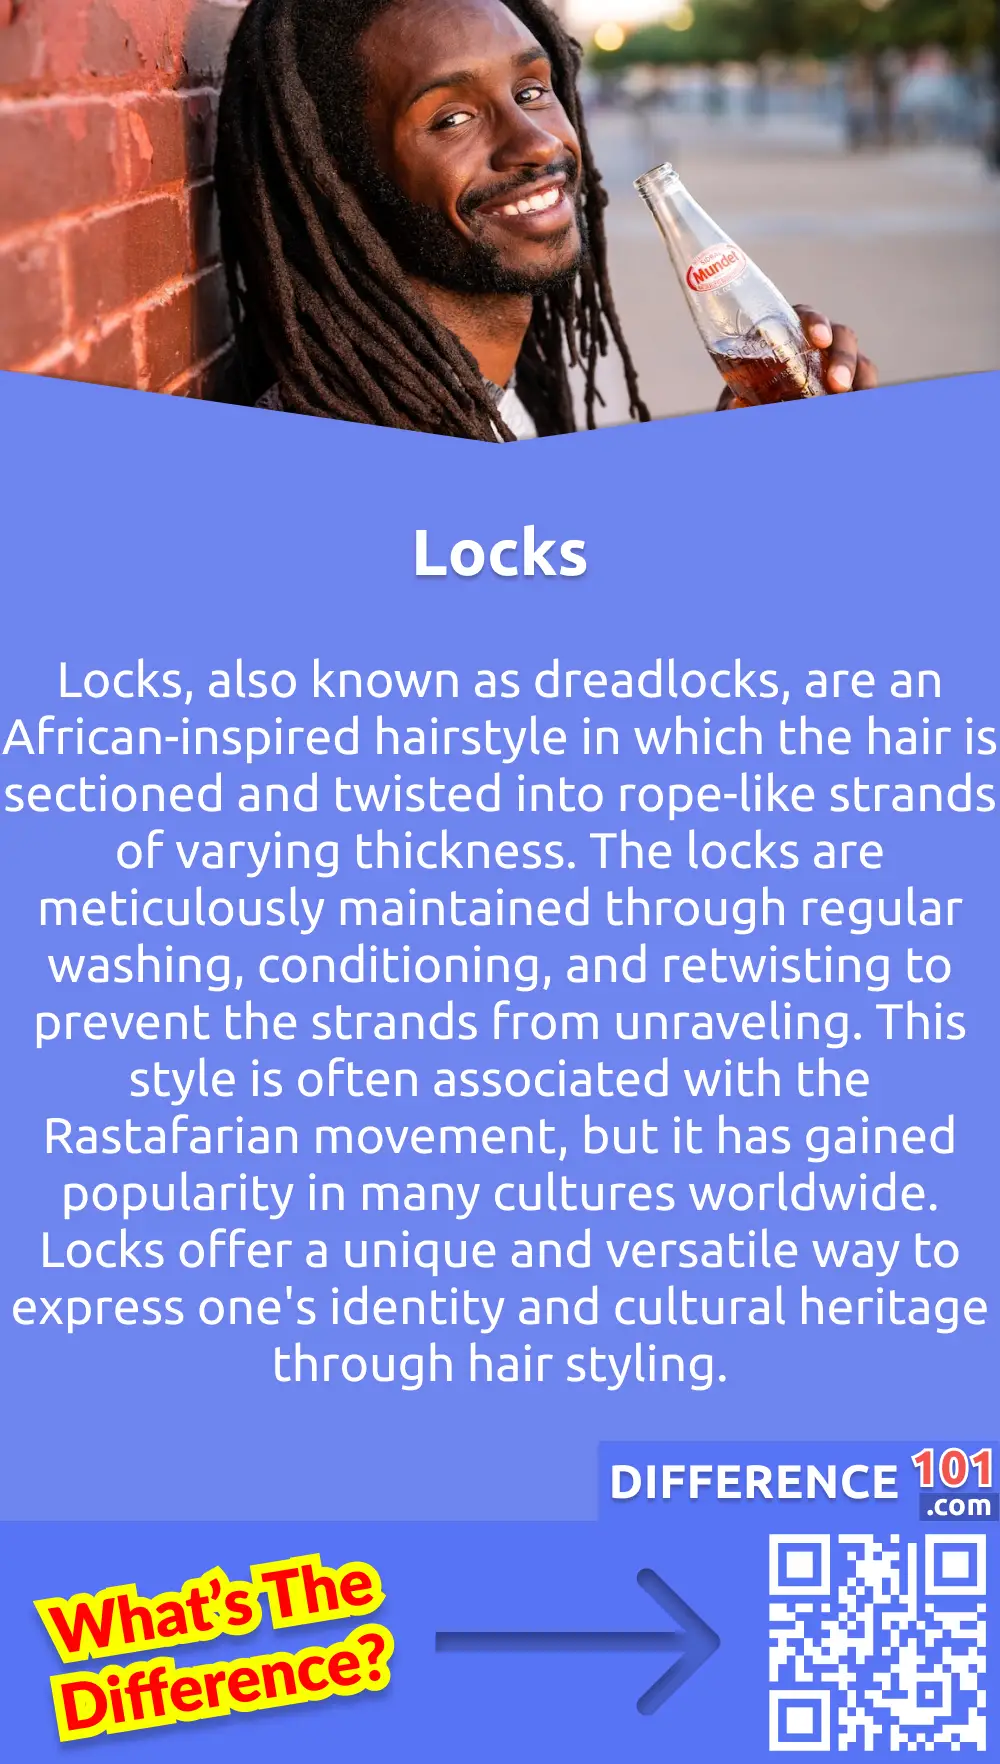 What Is Locks? Locks, also known as dreadlocks, are an African-inspired hairstyle in which the hair is sectioned and twisted into rope-like strands of varying thickness. The locks are meticulously maintained through regular washing, conditioning, and retwisting to prevent the strands from unraveling. This style is often associated with the Rastafarian movement, but it has gained popularity in many cultures worldwide. Locks offer a unique and versatile way to express one's identity and cultural heritage through hair styling. Whether created with natural or synthetic hair, locks can be adorned with beads, cowries, and other decorative elements to enhance their beauty. Overall, locks are a fascinating and iconic hairstyle that continues to captivate people all over the world.